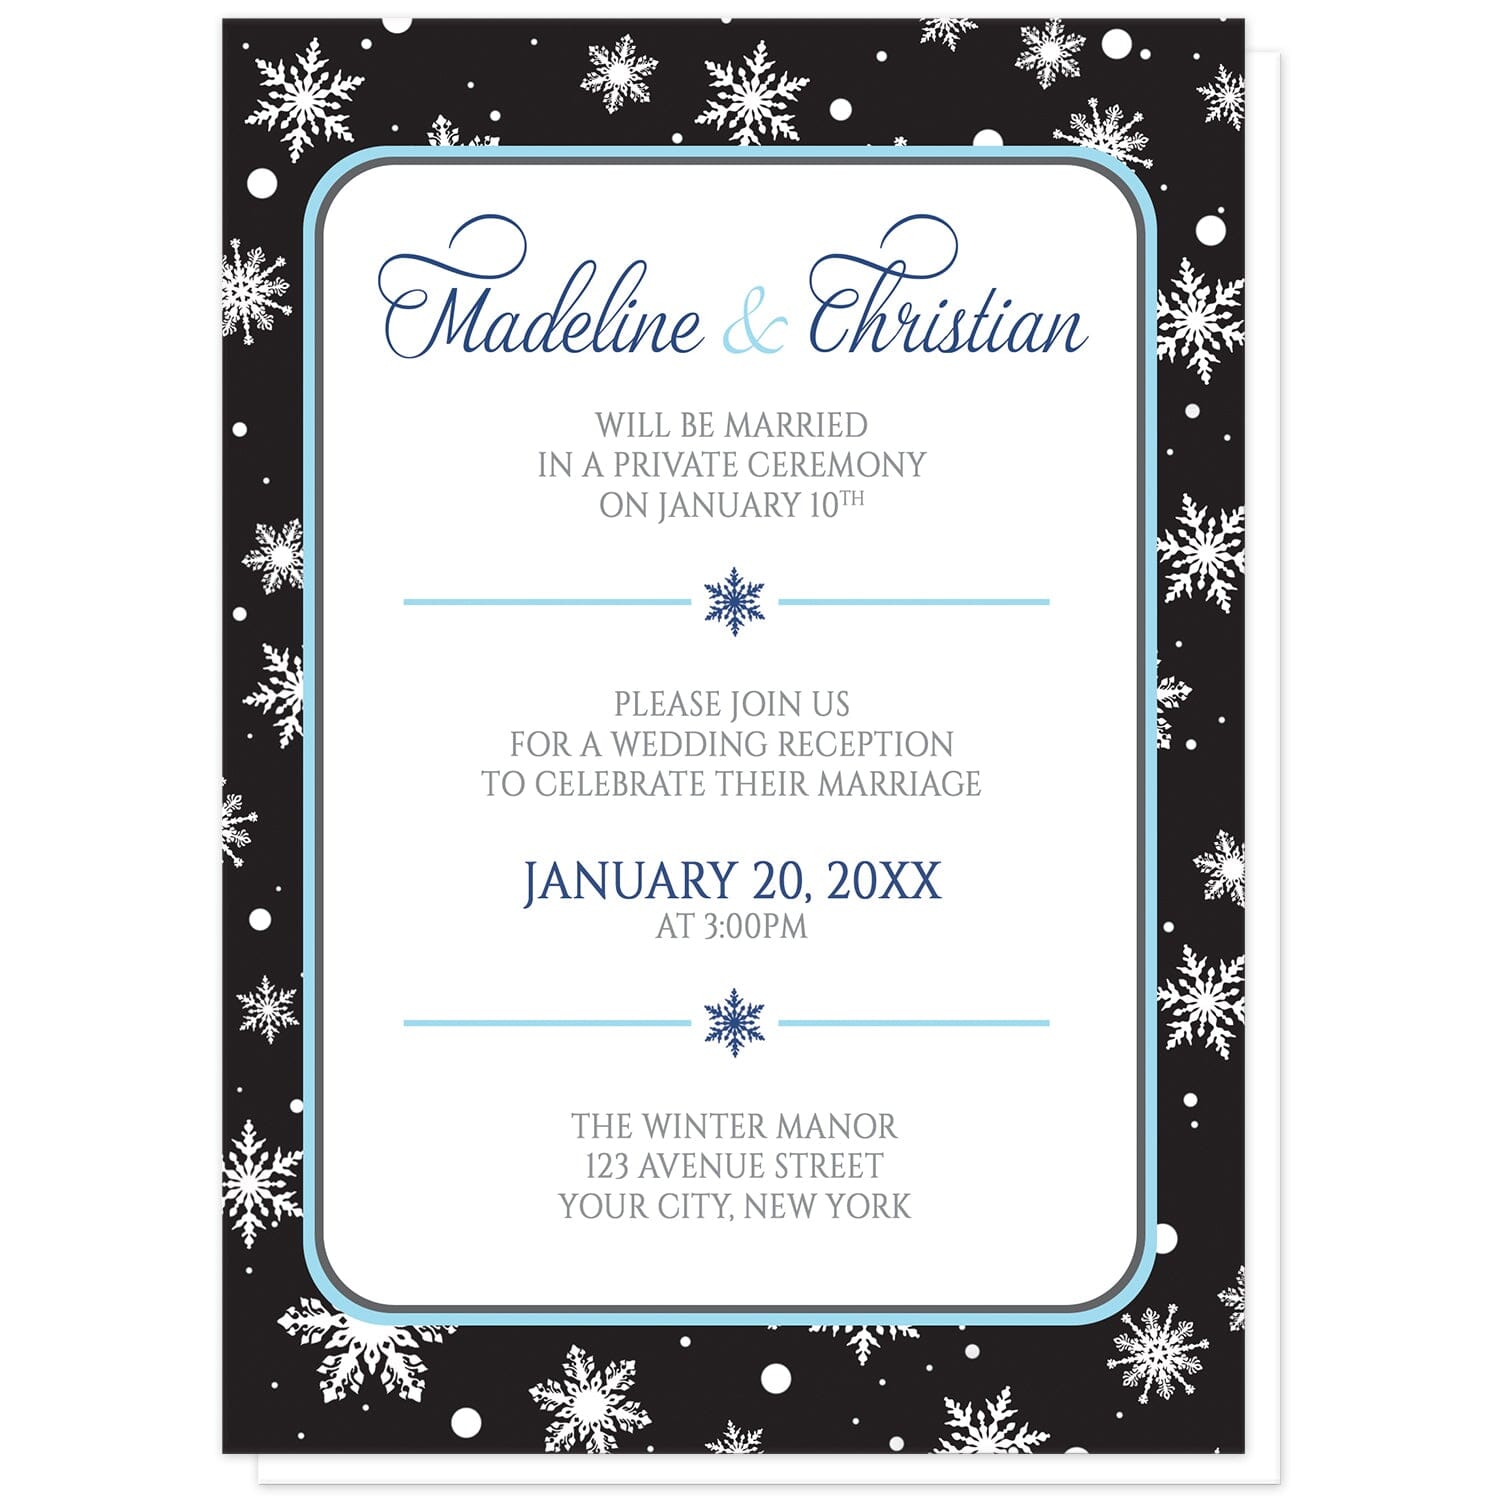 Midnight Snowflake Winter Reception Only Invitations at Artistically Invited. Midnight snowflake winter reception only invitations with white snowflakes over a black background. Your personalized post-wedding reception celebration details are custom printed in navy blue, aqua blue, and medium gray over a white rectangular area outlined in aqua and navy blue.